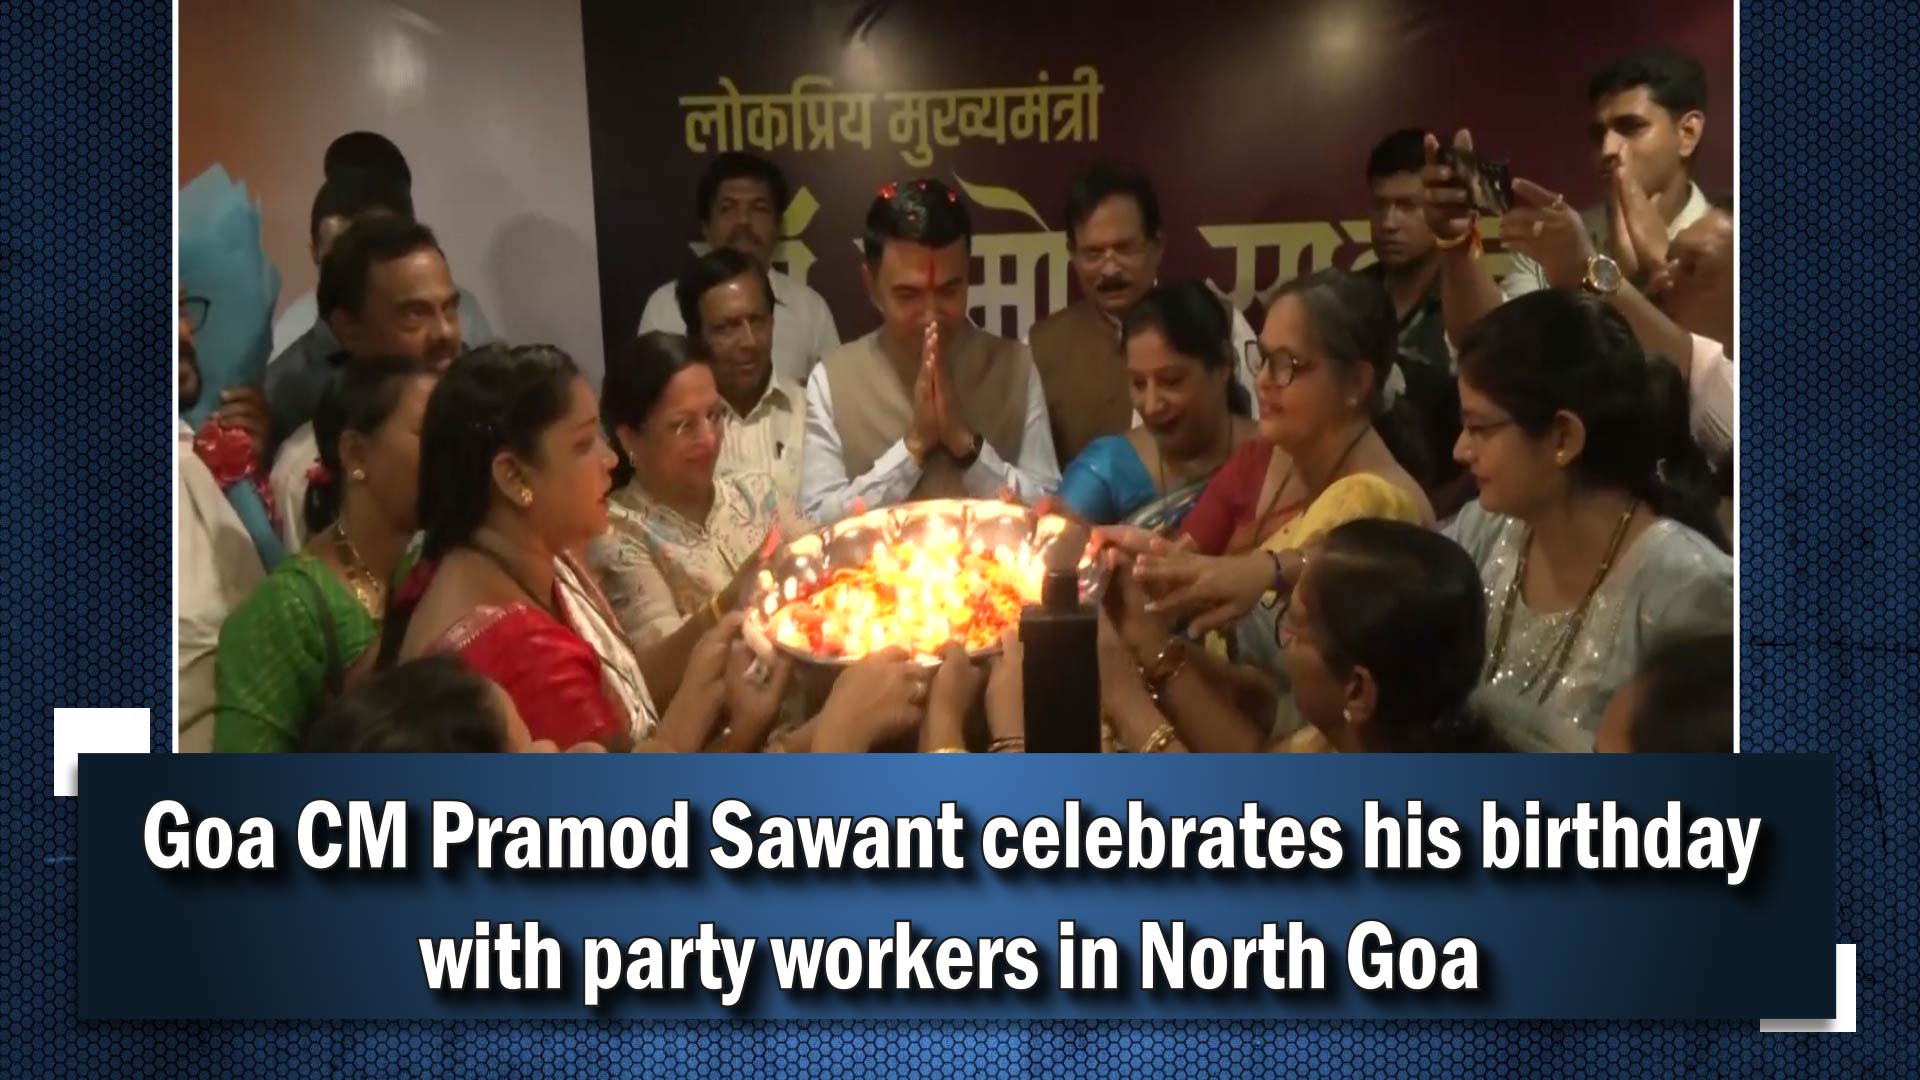 Goa Chief Minister Pramod Sawant celebrates his birthday with party workers in North Goa